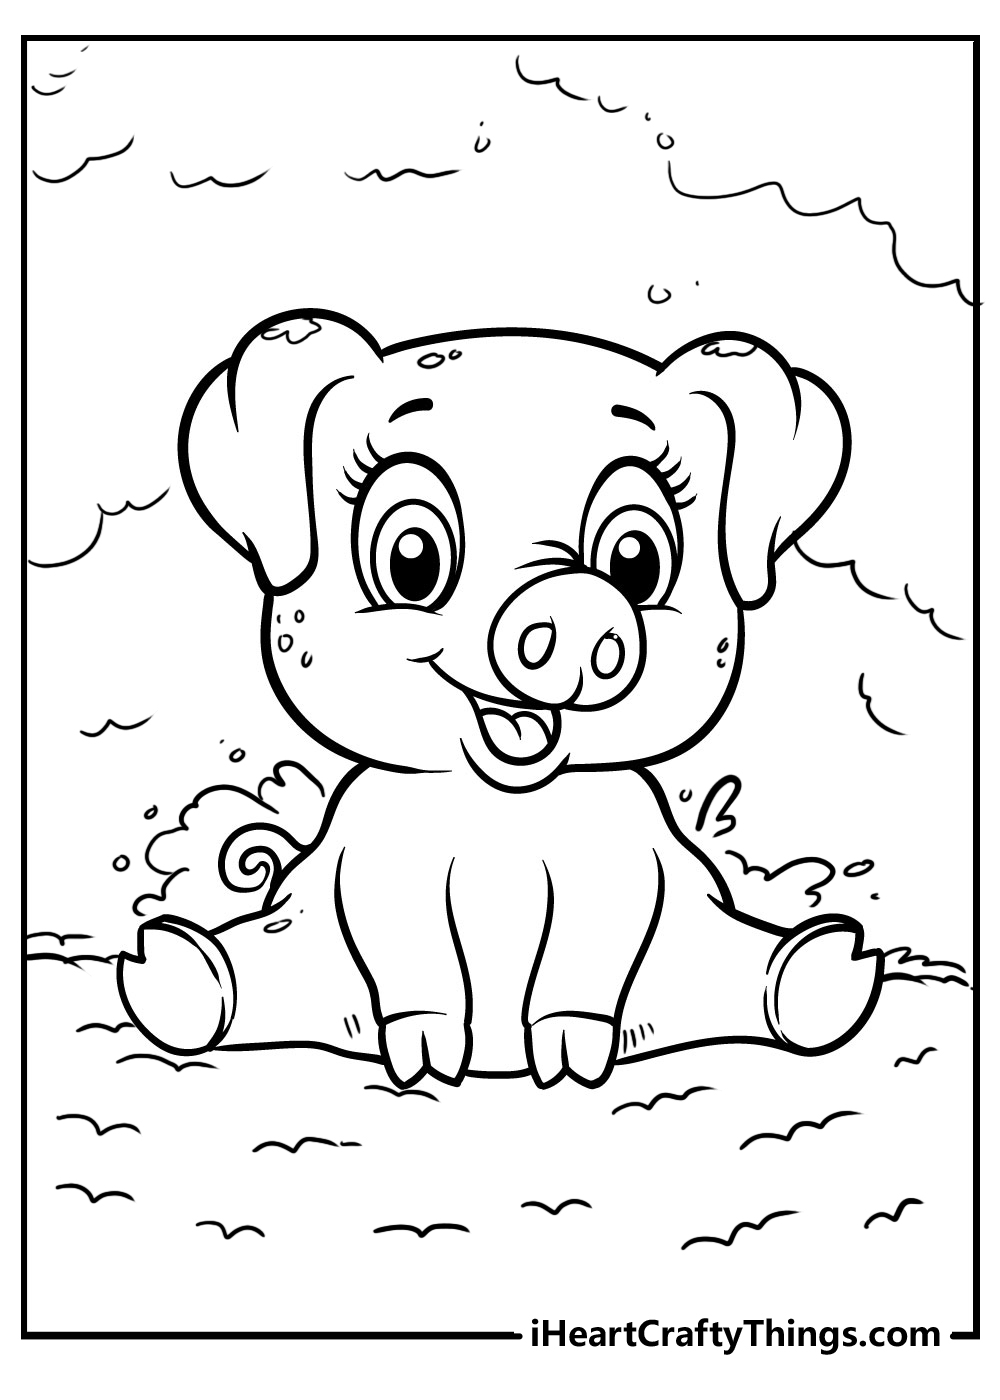 Pig Coloring Pages Updated 20